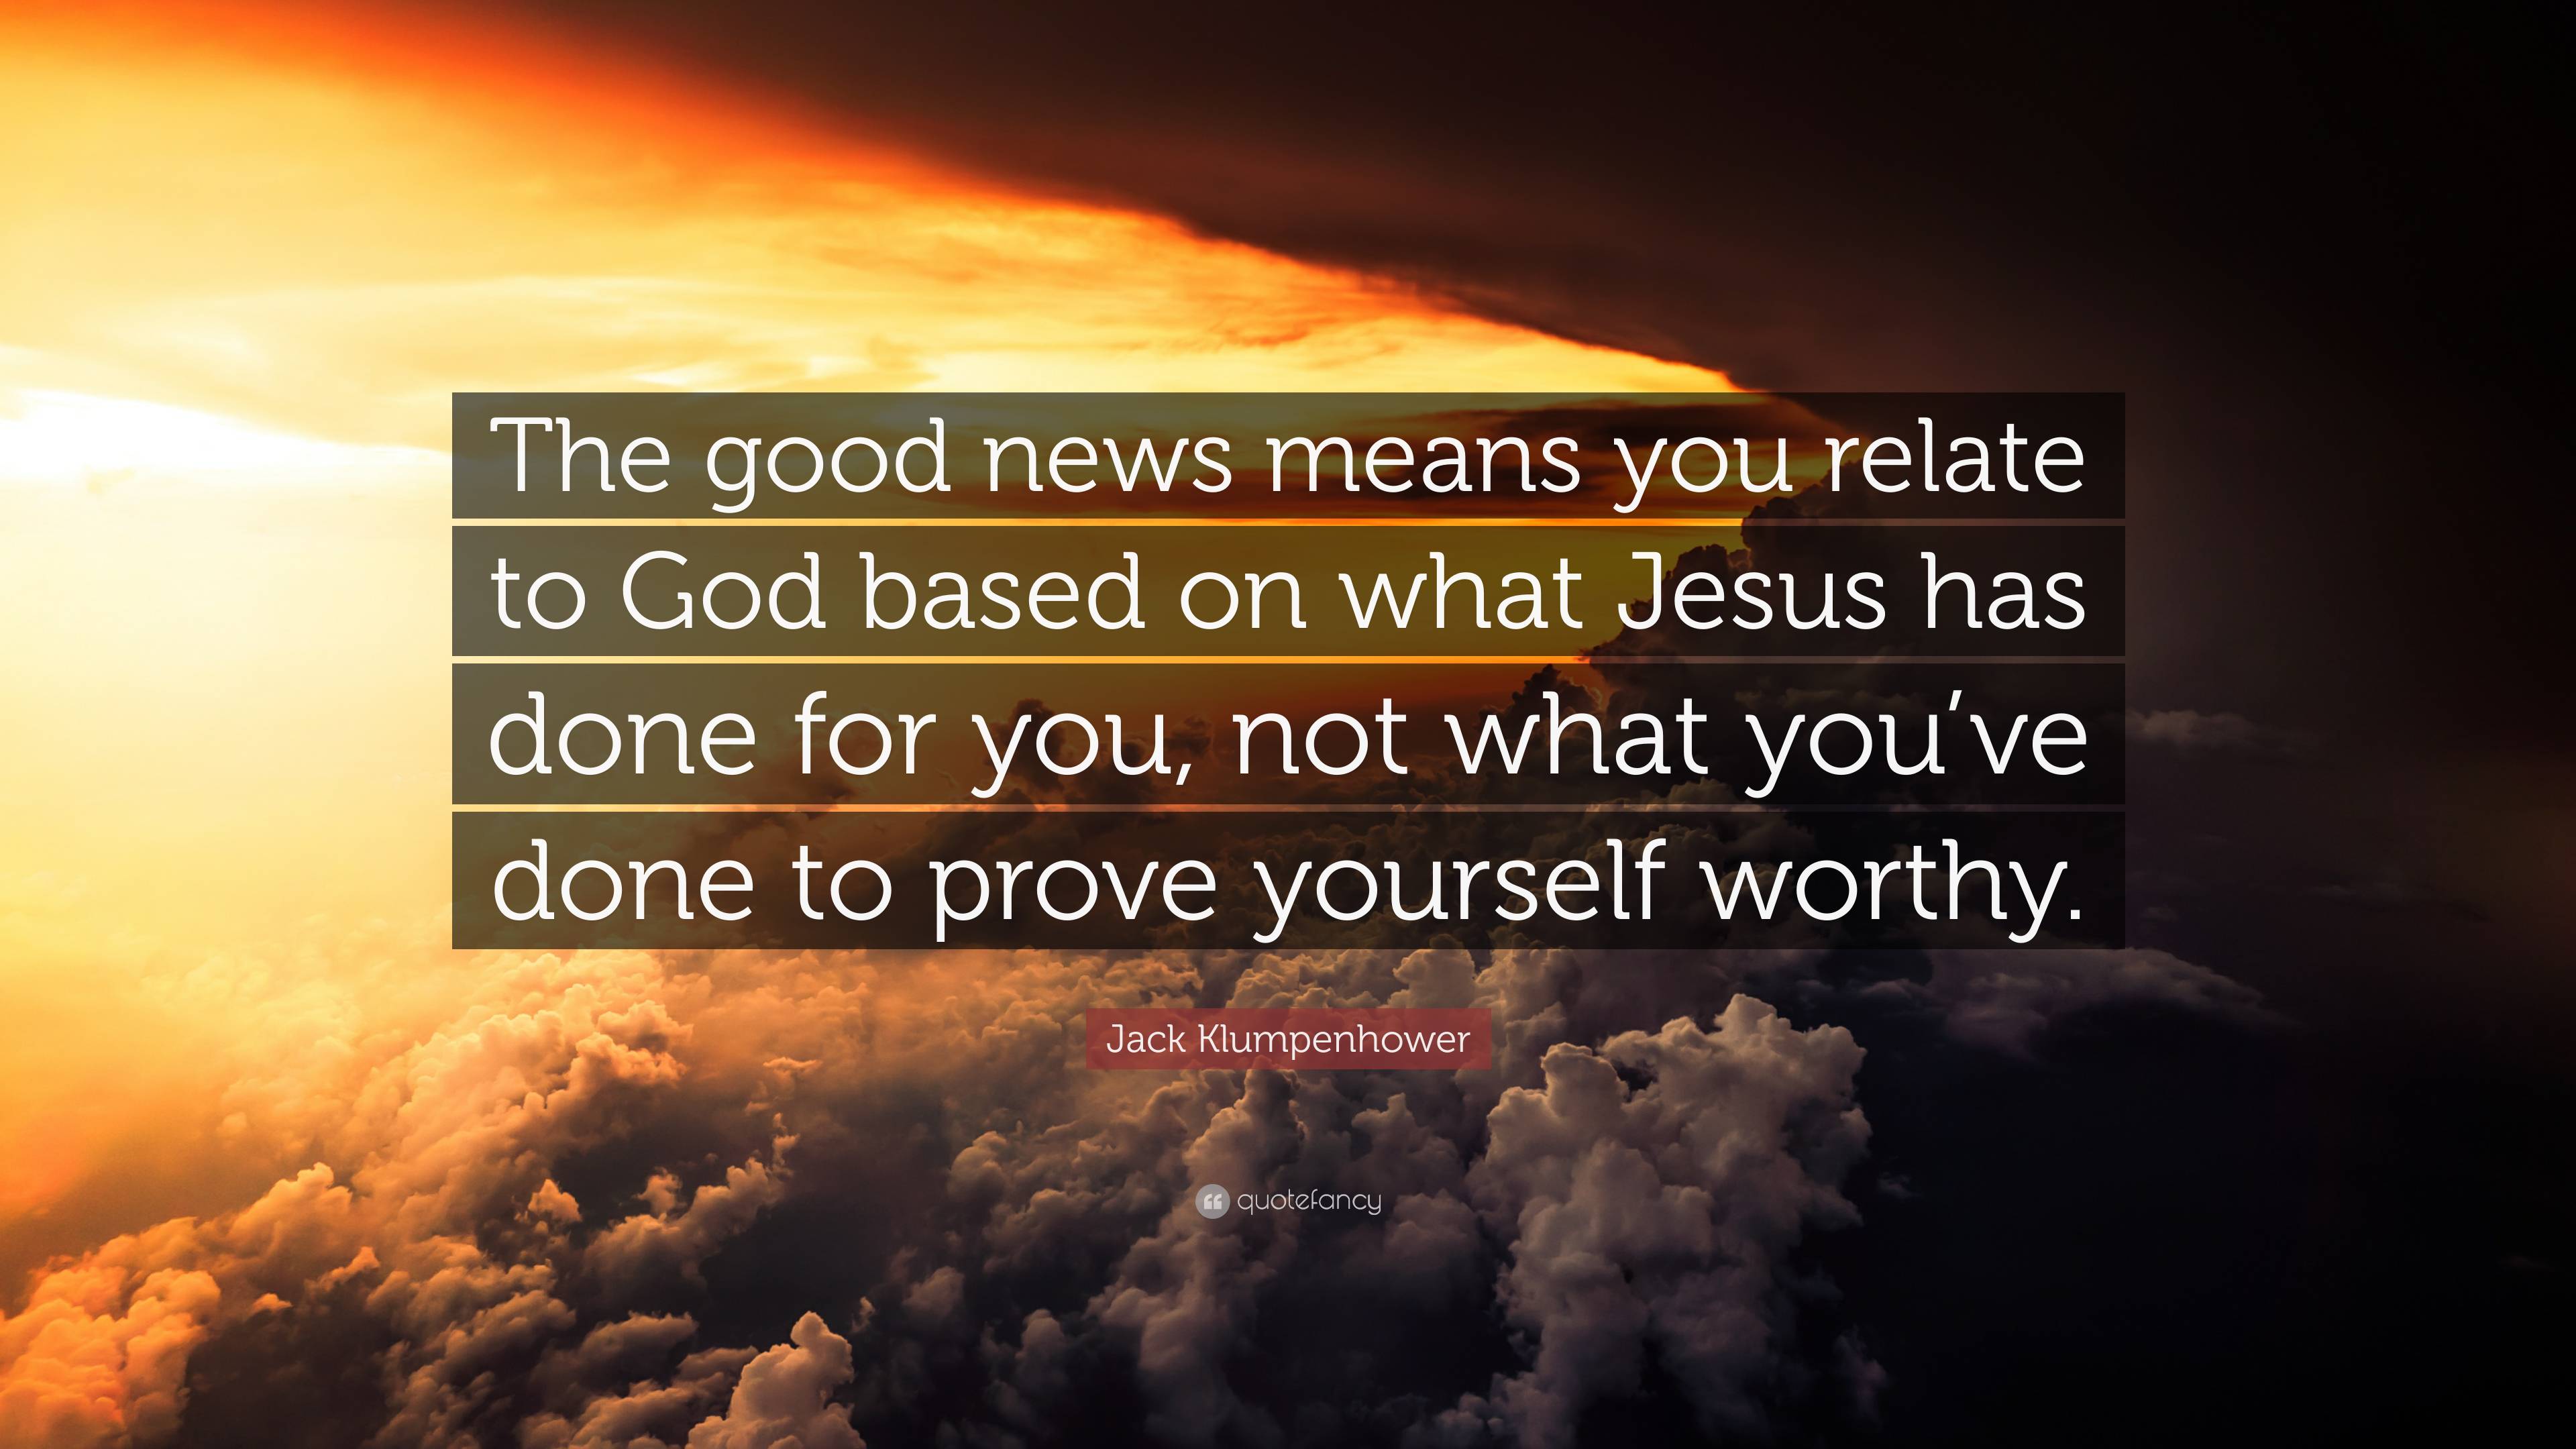 Jack Klumpenhower Quote: “The good news means you relate to God based ...